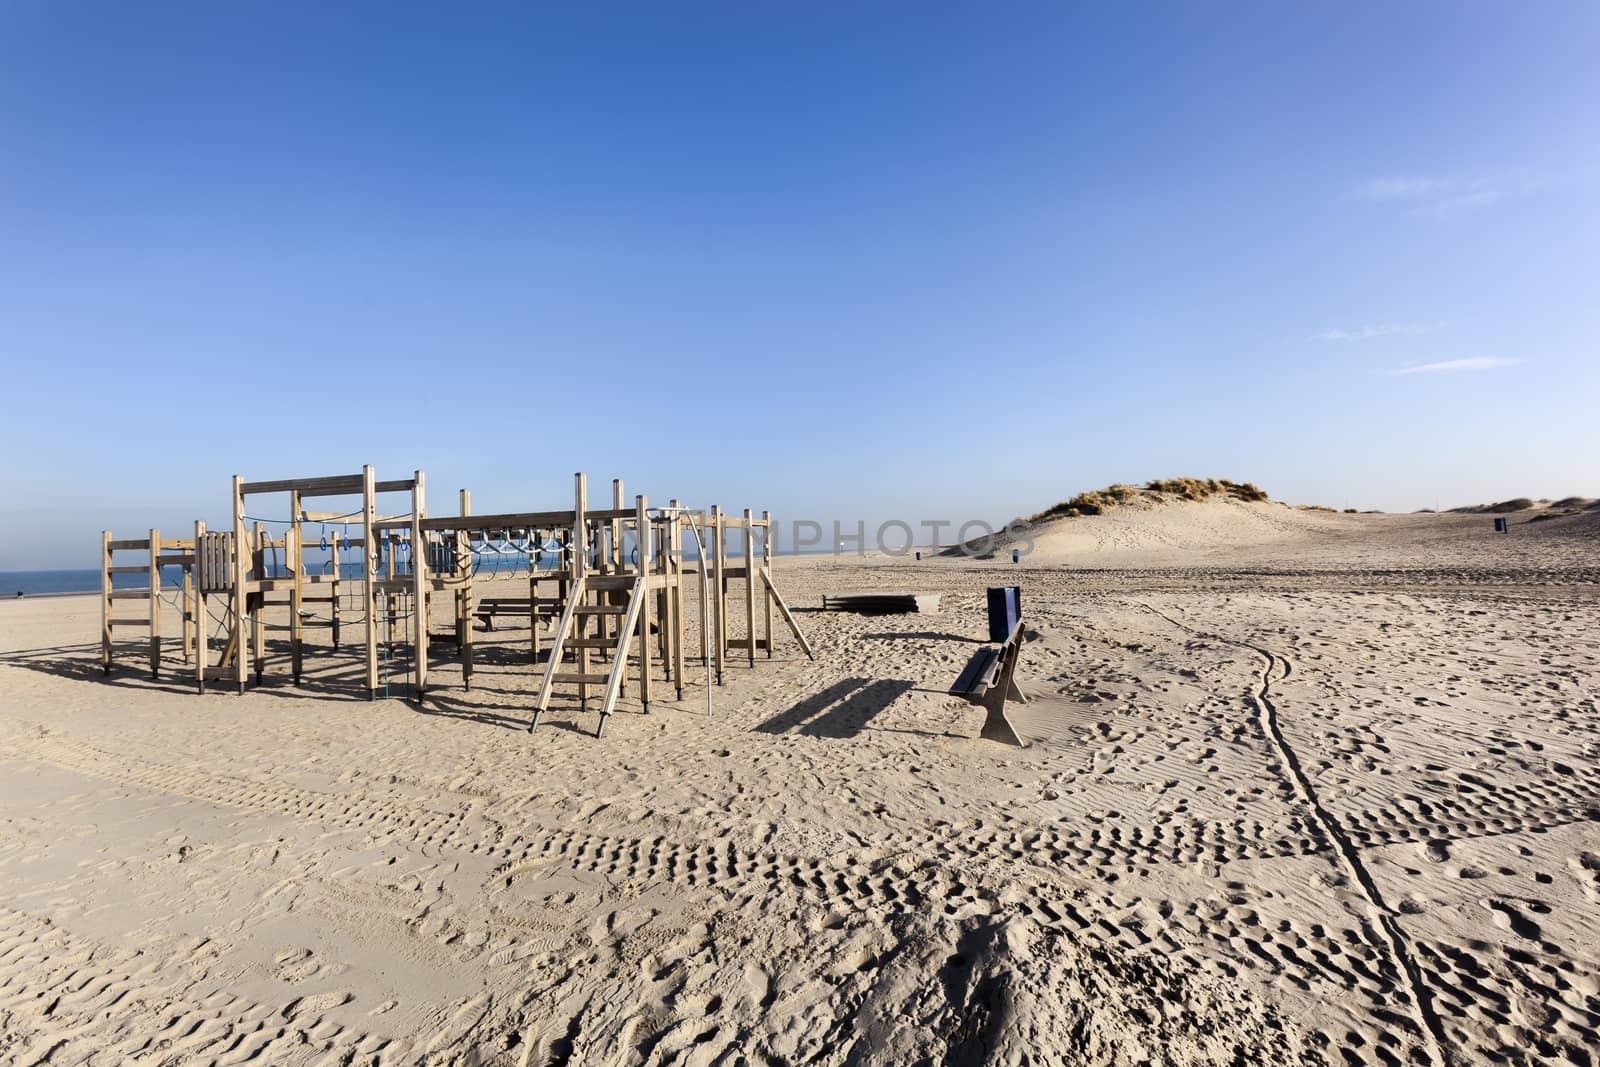 Wooden playground on the beach of Hoek van Holland in the Netherlands with some dunes in the background